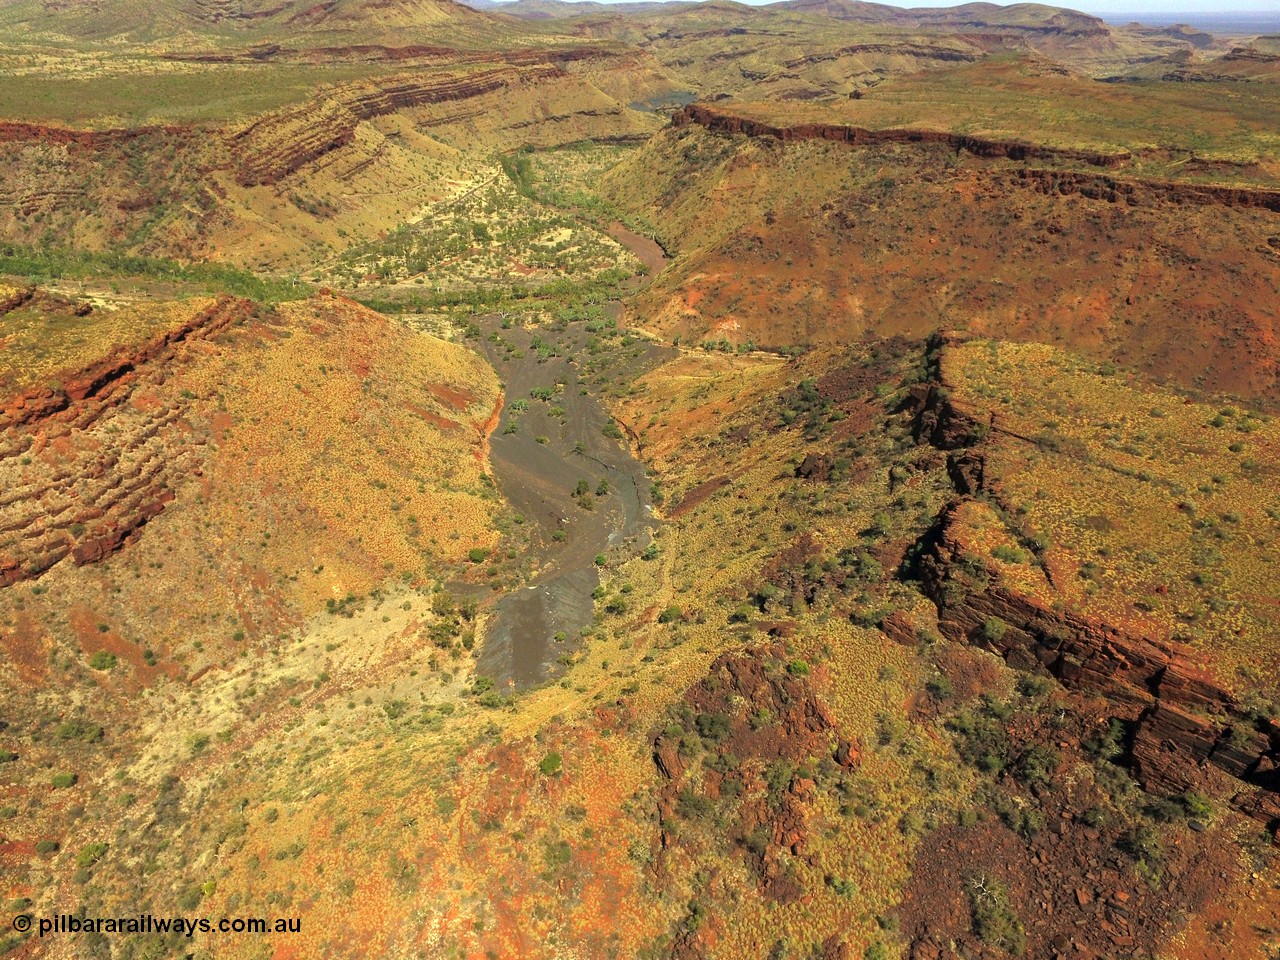 160101 DJI 0010
Wittenoom Gorge, view from above East Gorge looking north west with the tailings stacked up the gorge and the remains of the settlement in the middle, Wittenoom is out the top right corner. [url=https://goo.gl/maps/Sh2ZPqKDDKdkPsjs7]Geodata[/url].
